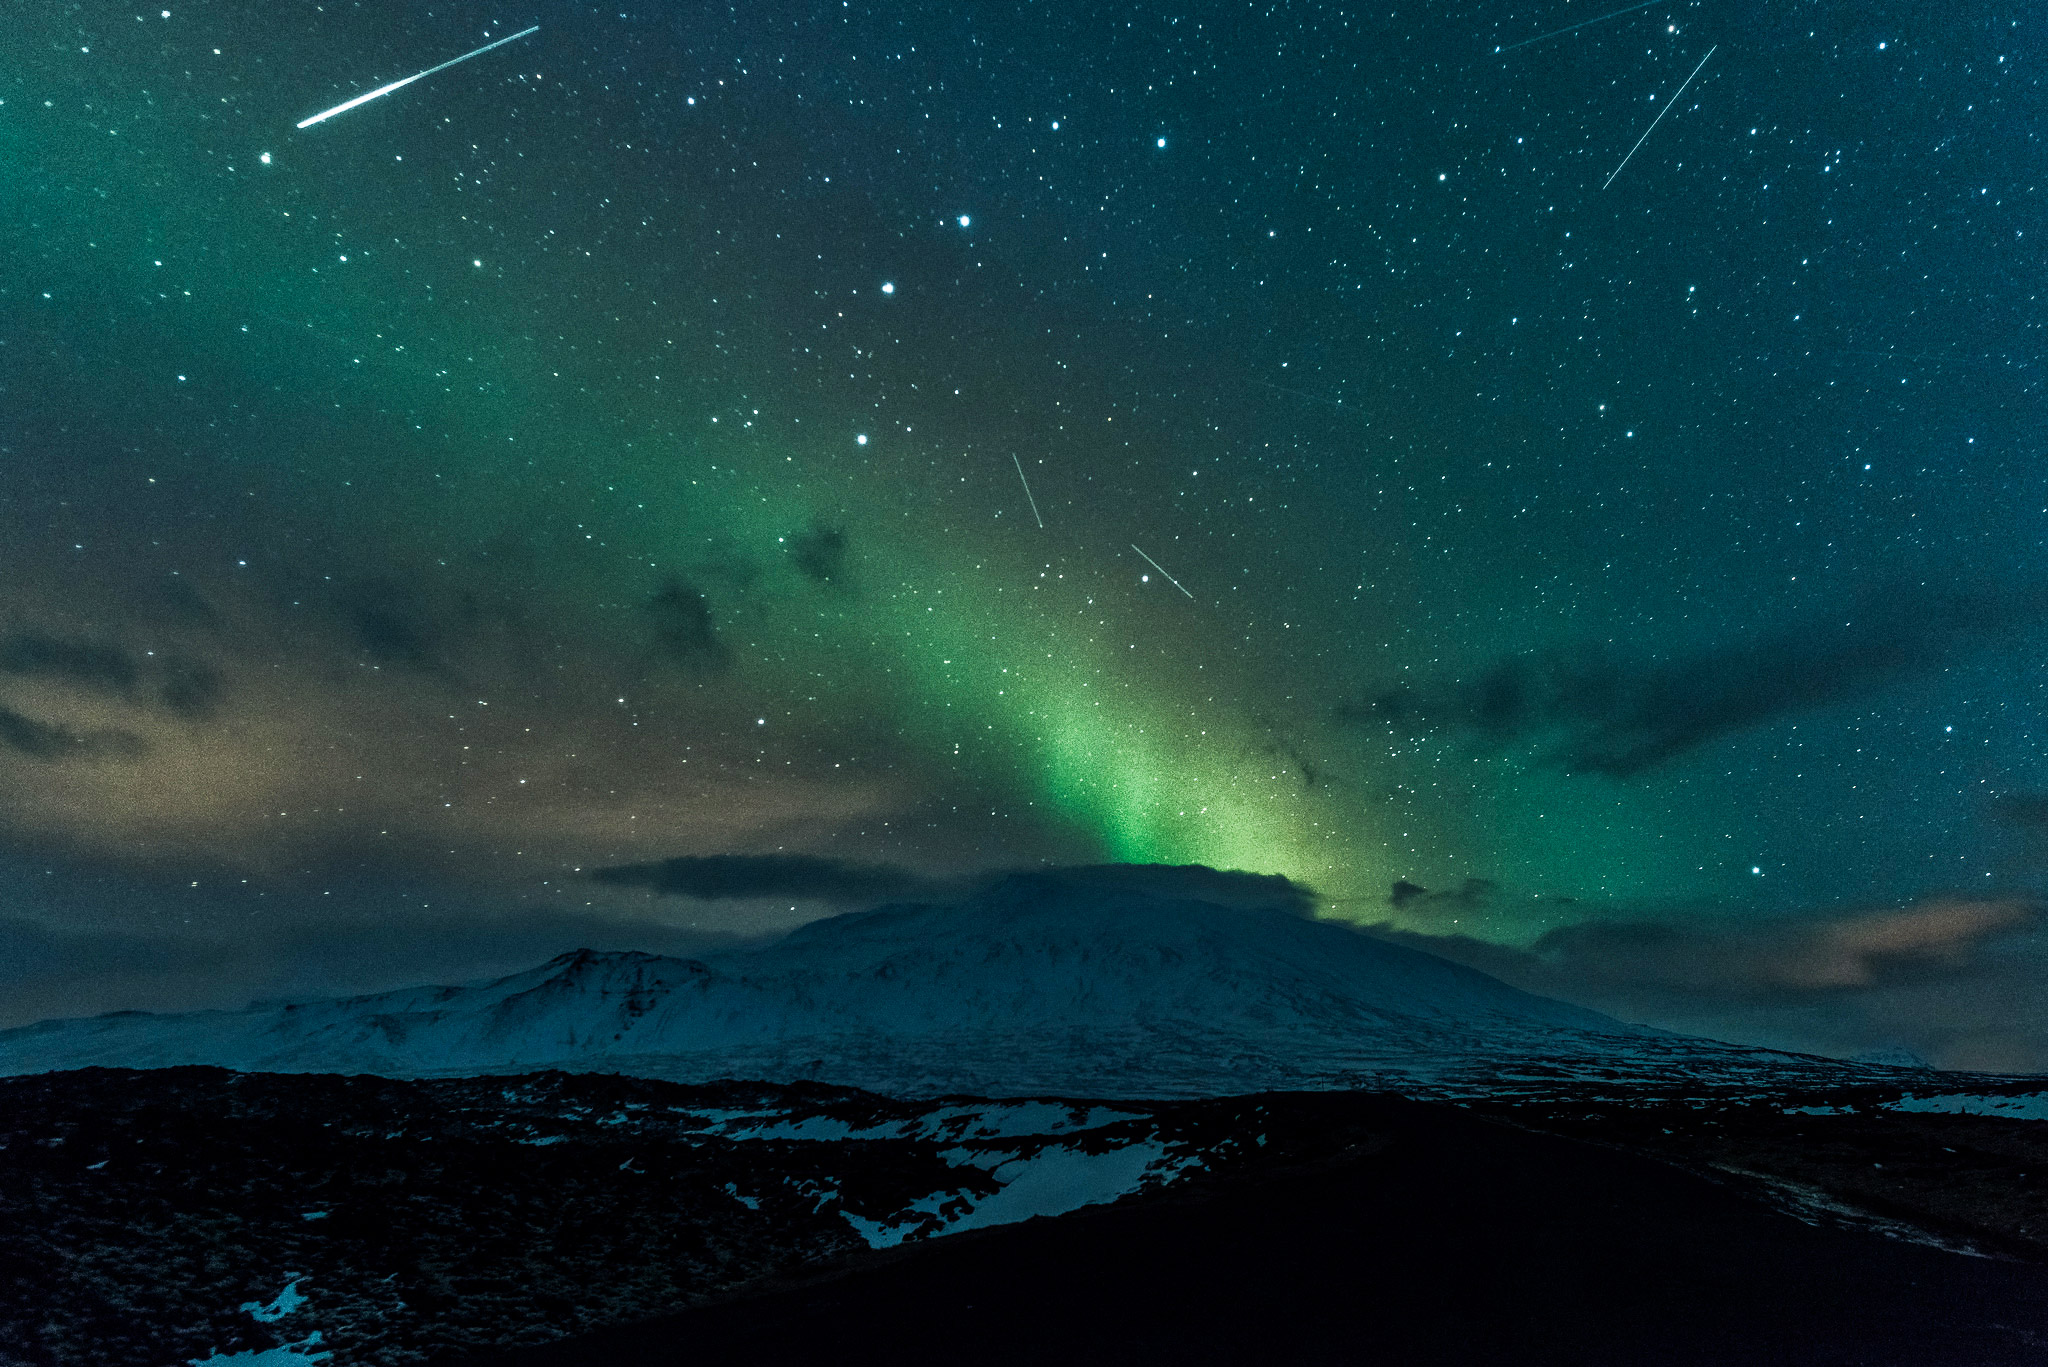  Meteors and Northern Lights over Snæfellsnes glacier, Iceland – Feb 20th, 2015 – © Diana Robinson (https://www.flickr.com/photos/dianasch/)